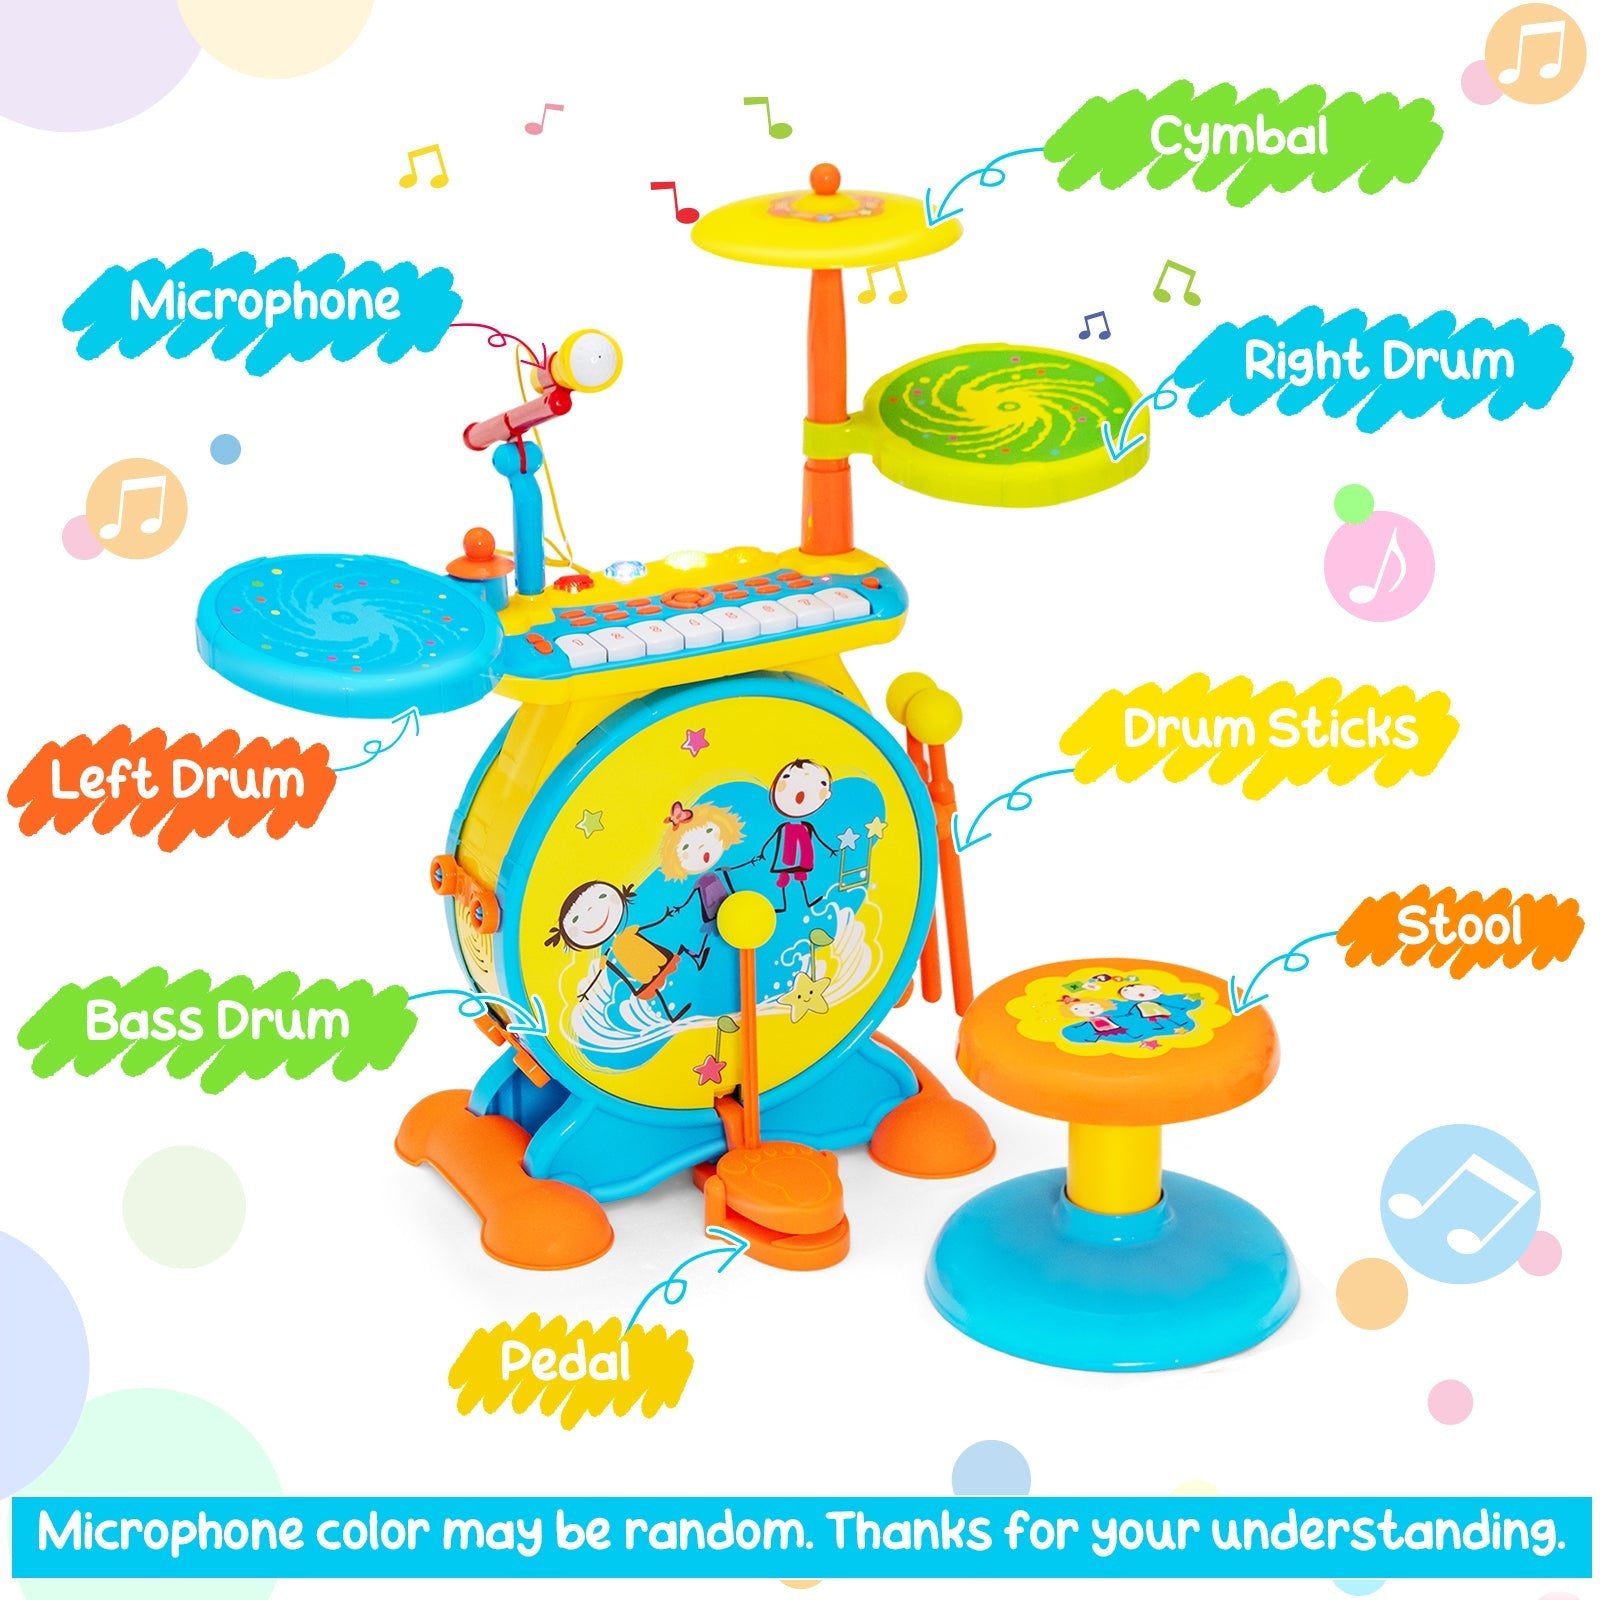 Dynamic Children's Drum Kit Toy - 2-in-1 Electronic with Keyboard & Microphone